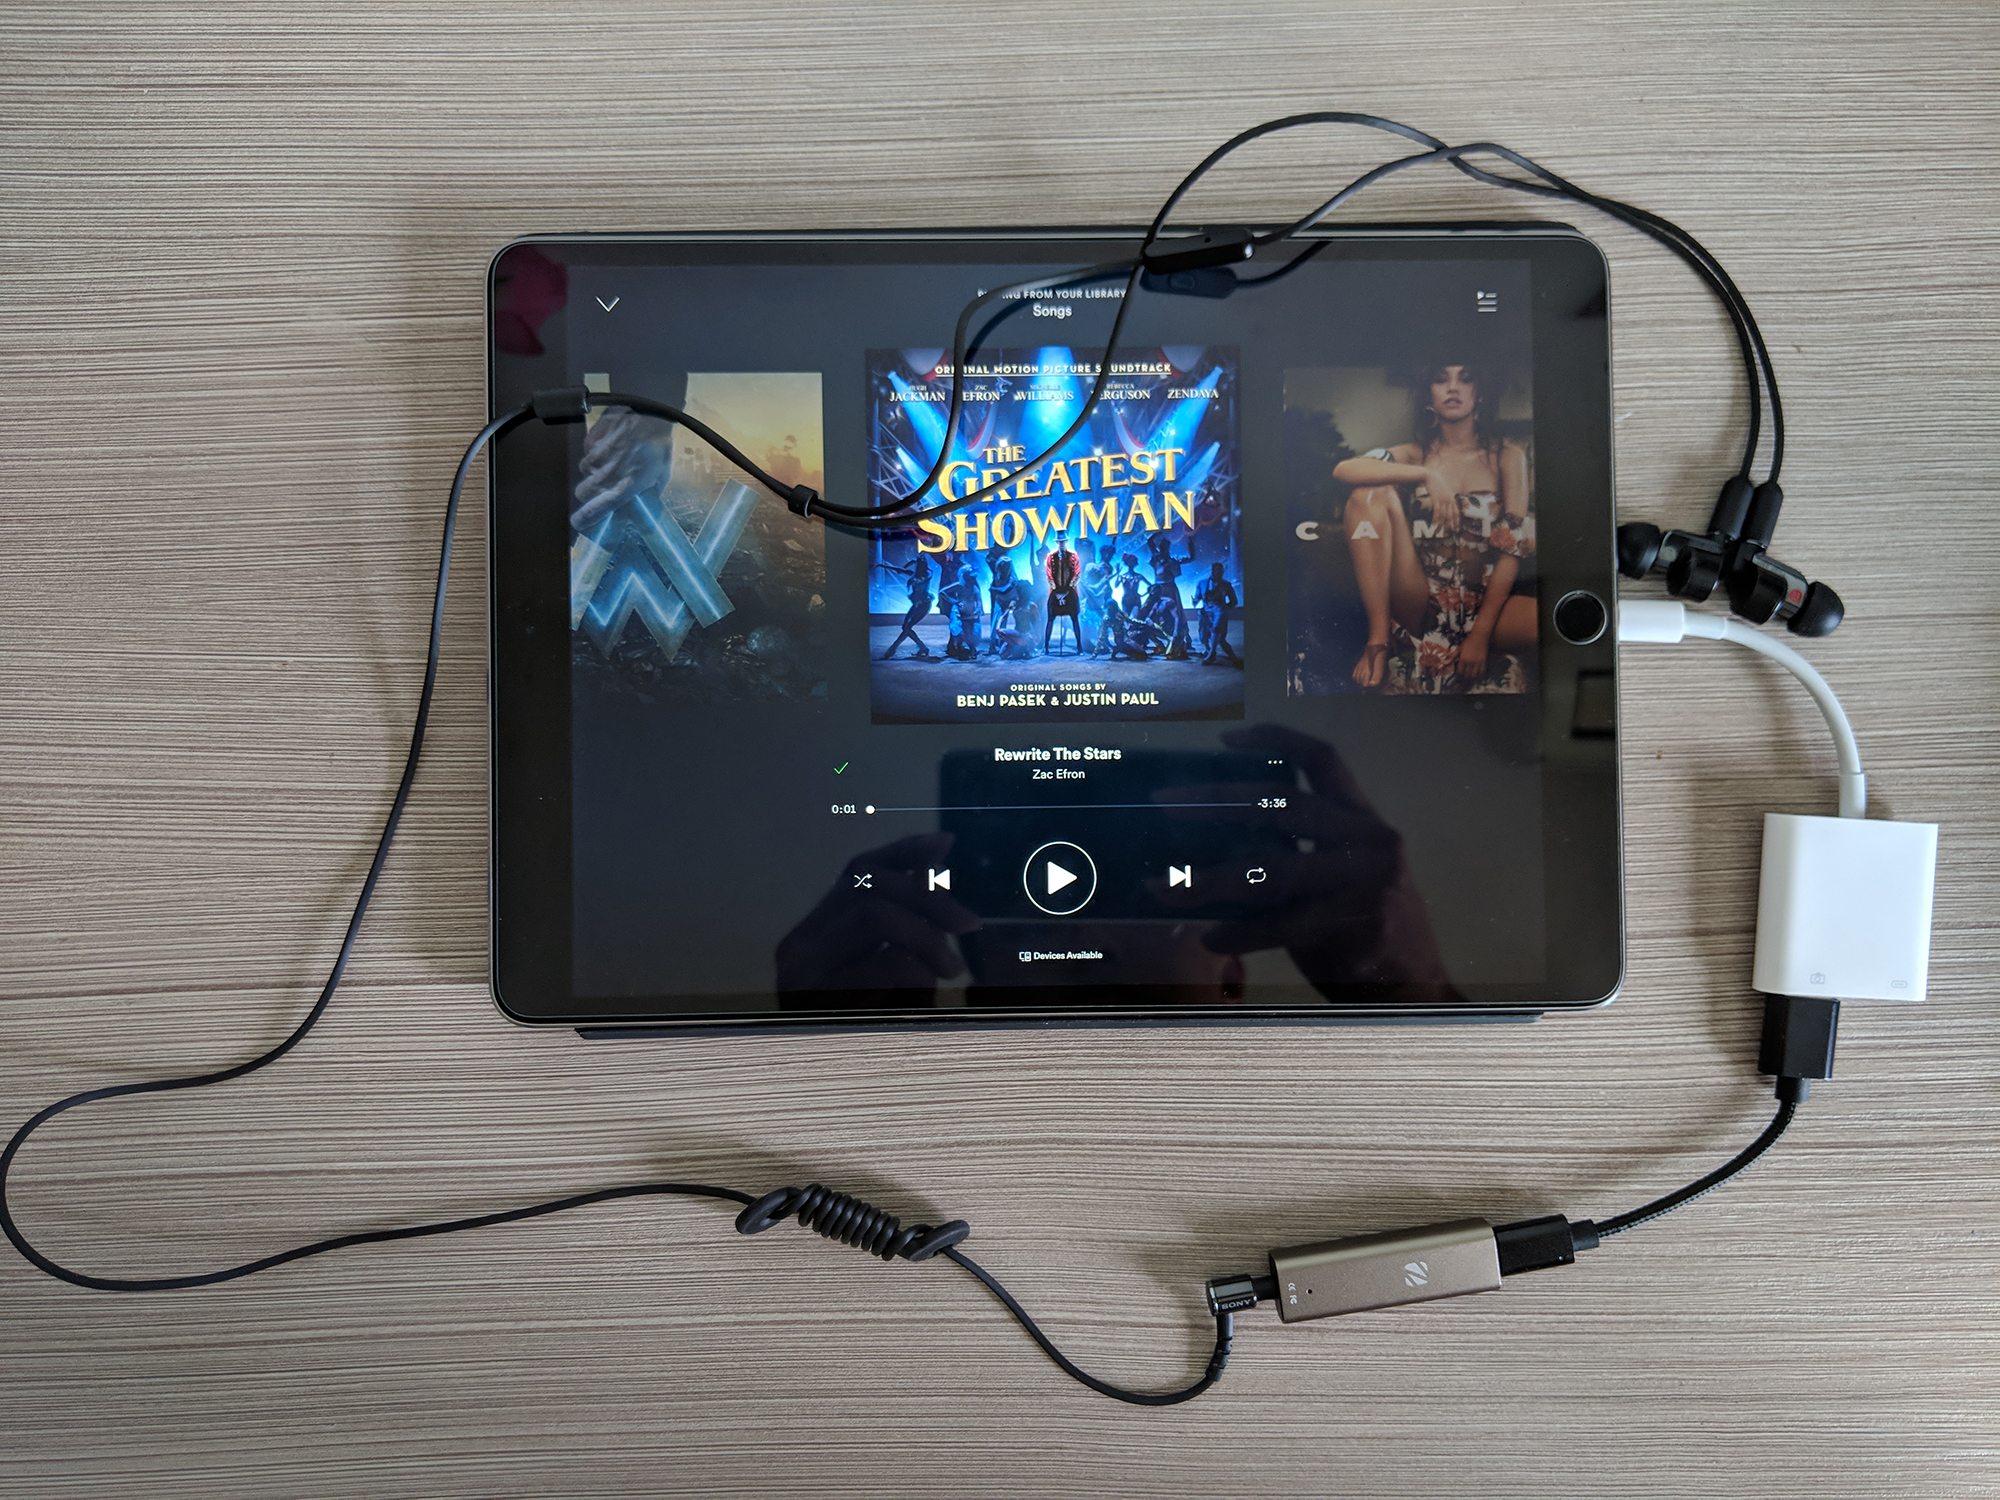 ZuperDAC-S connected to iPad Pro 10.5 inch